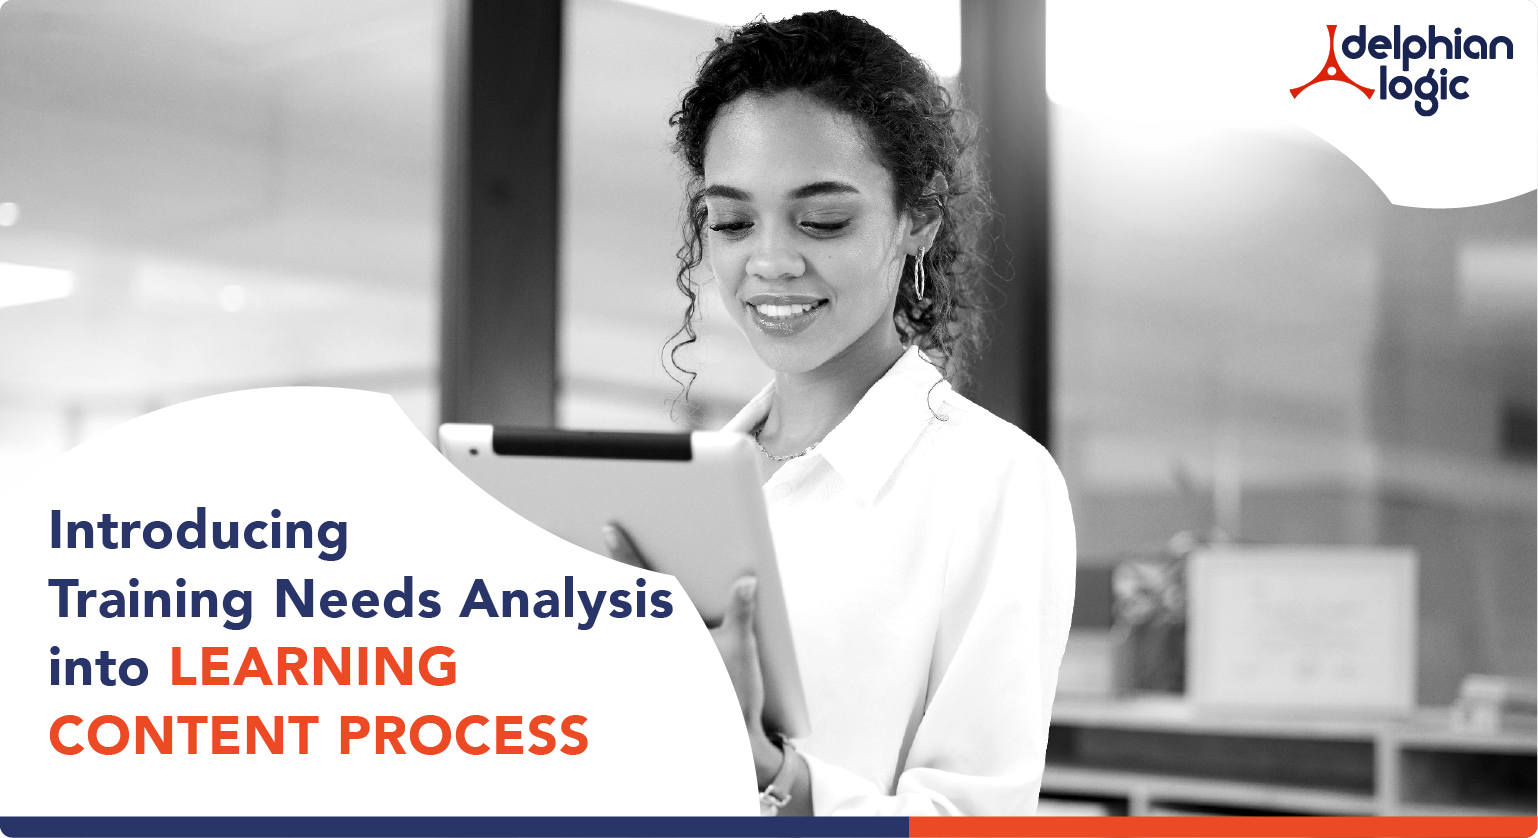 Introducing Training Needs Analysis into Learning Content Process